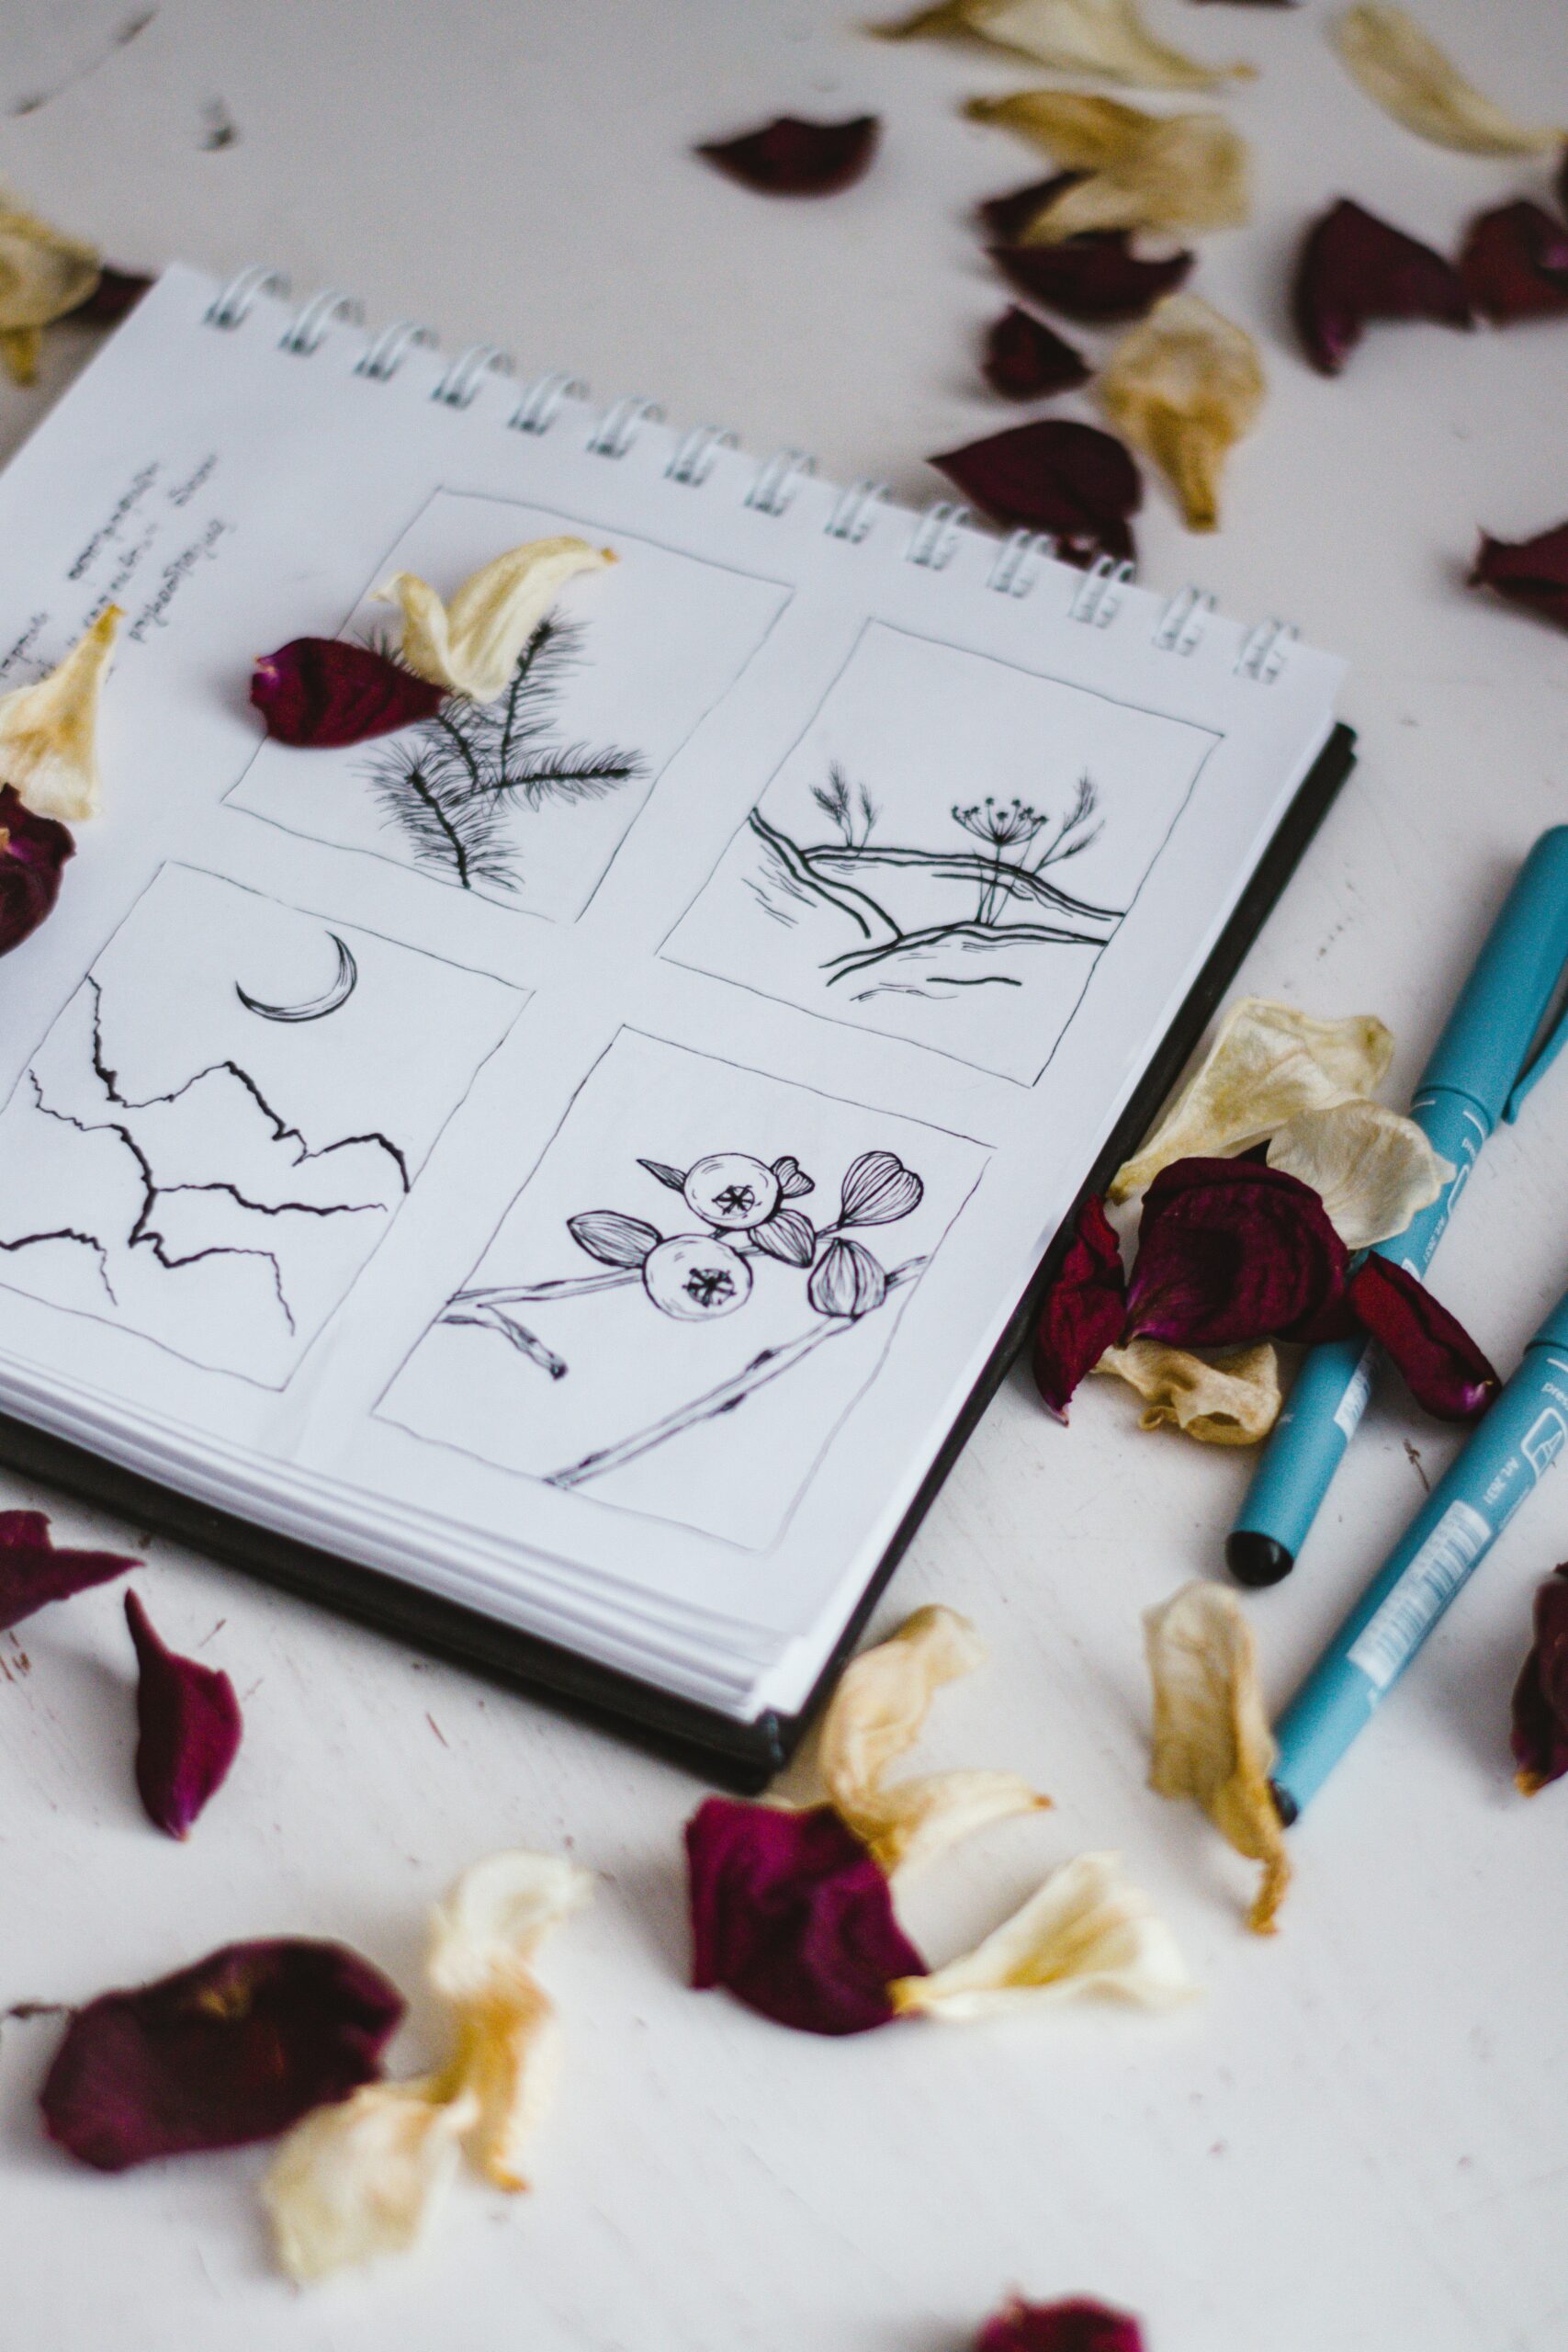 A notebook with hand-drawn botanical sketches